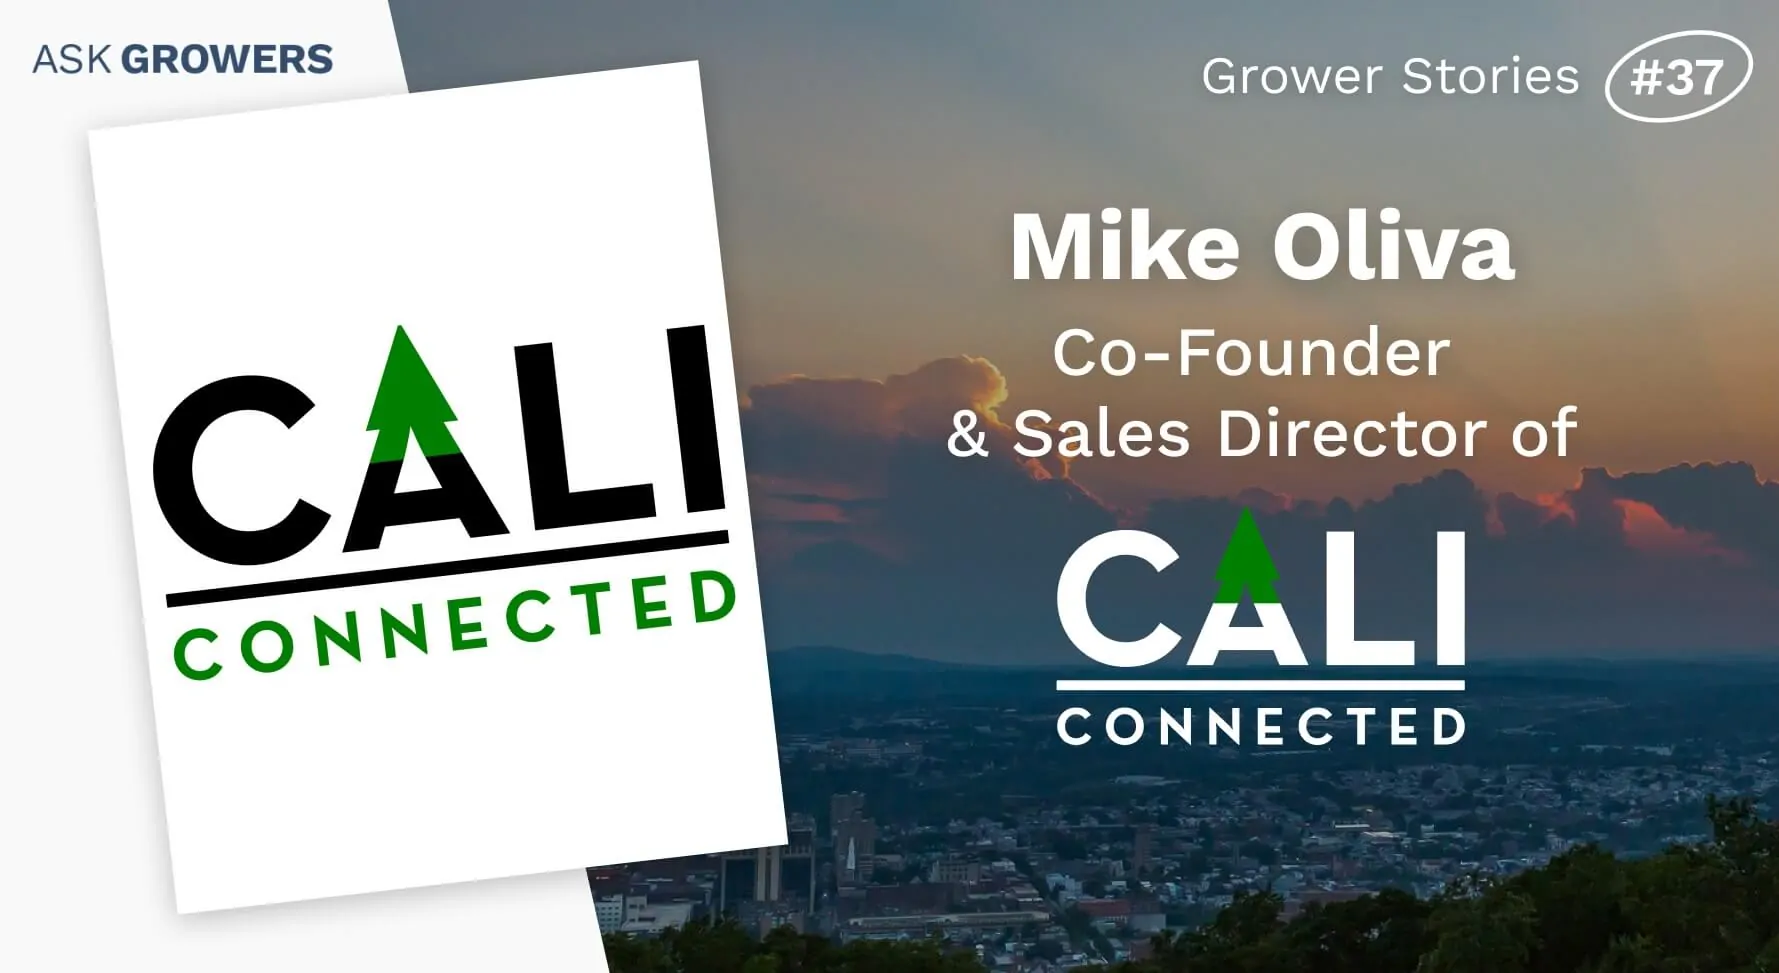 Grower Stories #37: Mike Oliva